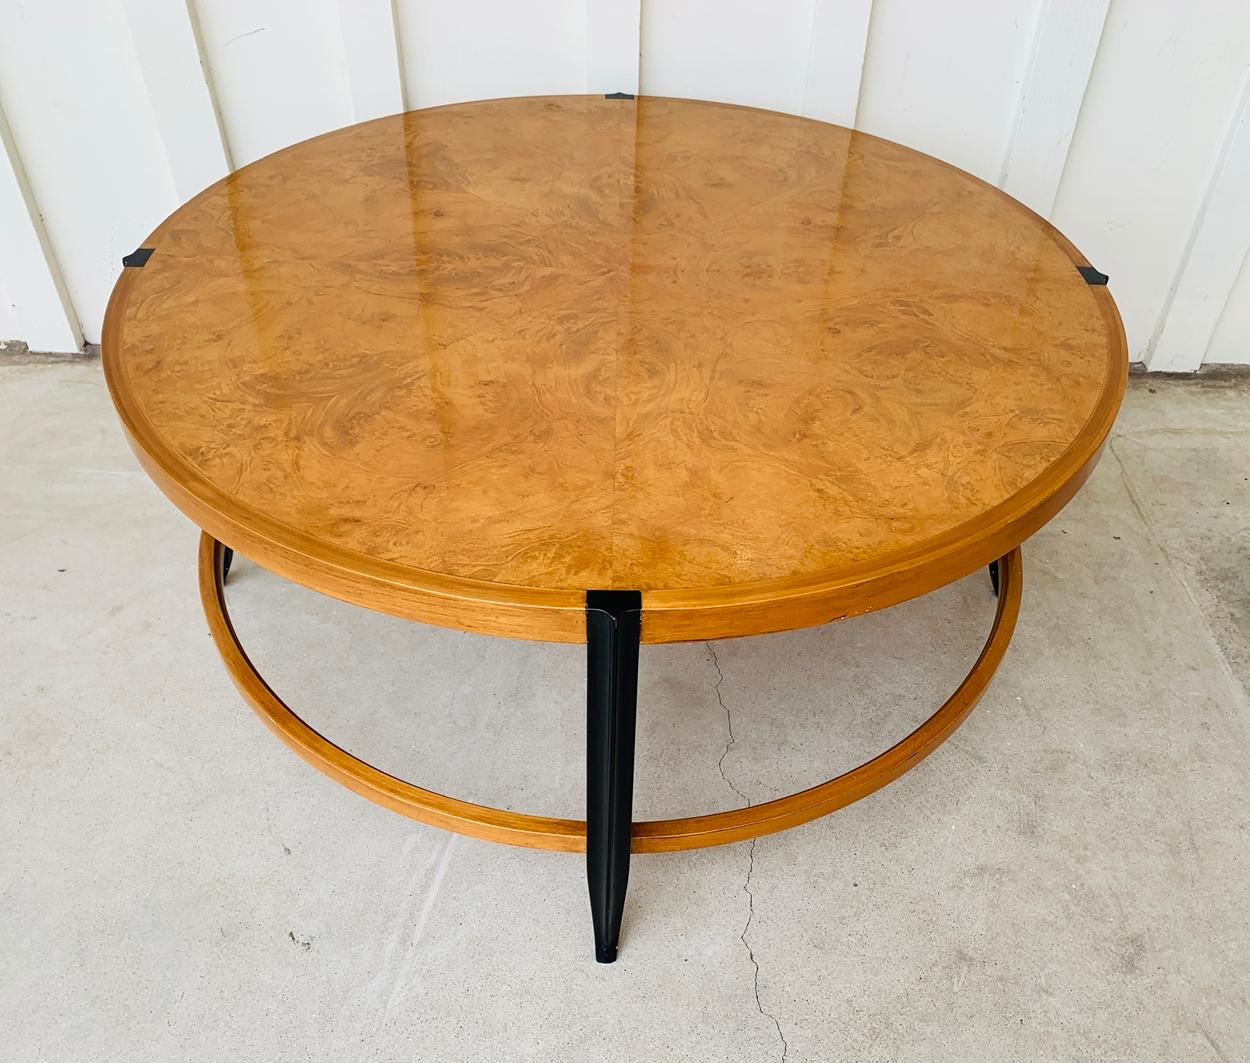 Stunning coffee table with maple burl wood top and black lacquered legs.

The table has a second self which could accommodate a glass piece for extra storage space.

Measurements:
38 inches in diameter x 18 inches high x 6 inches high to